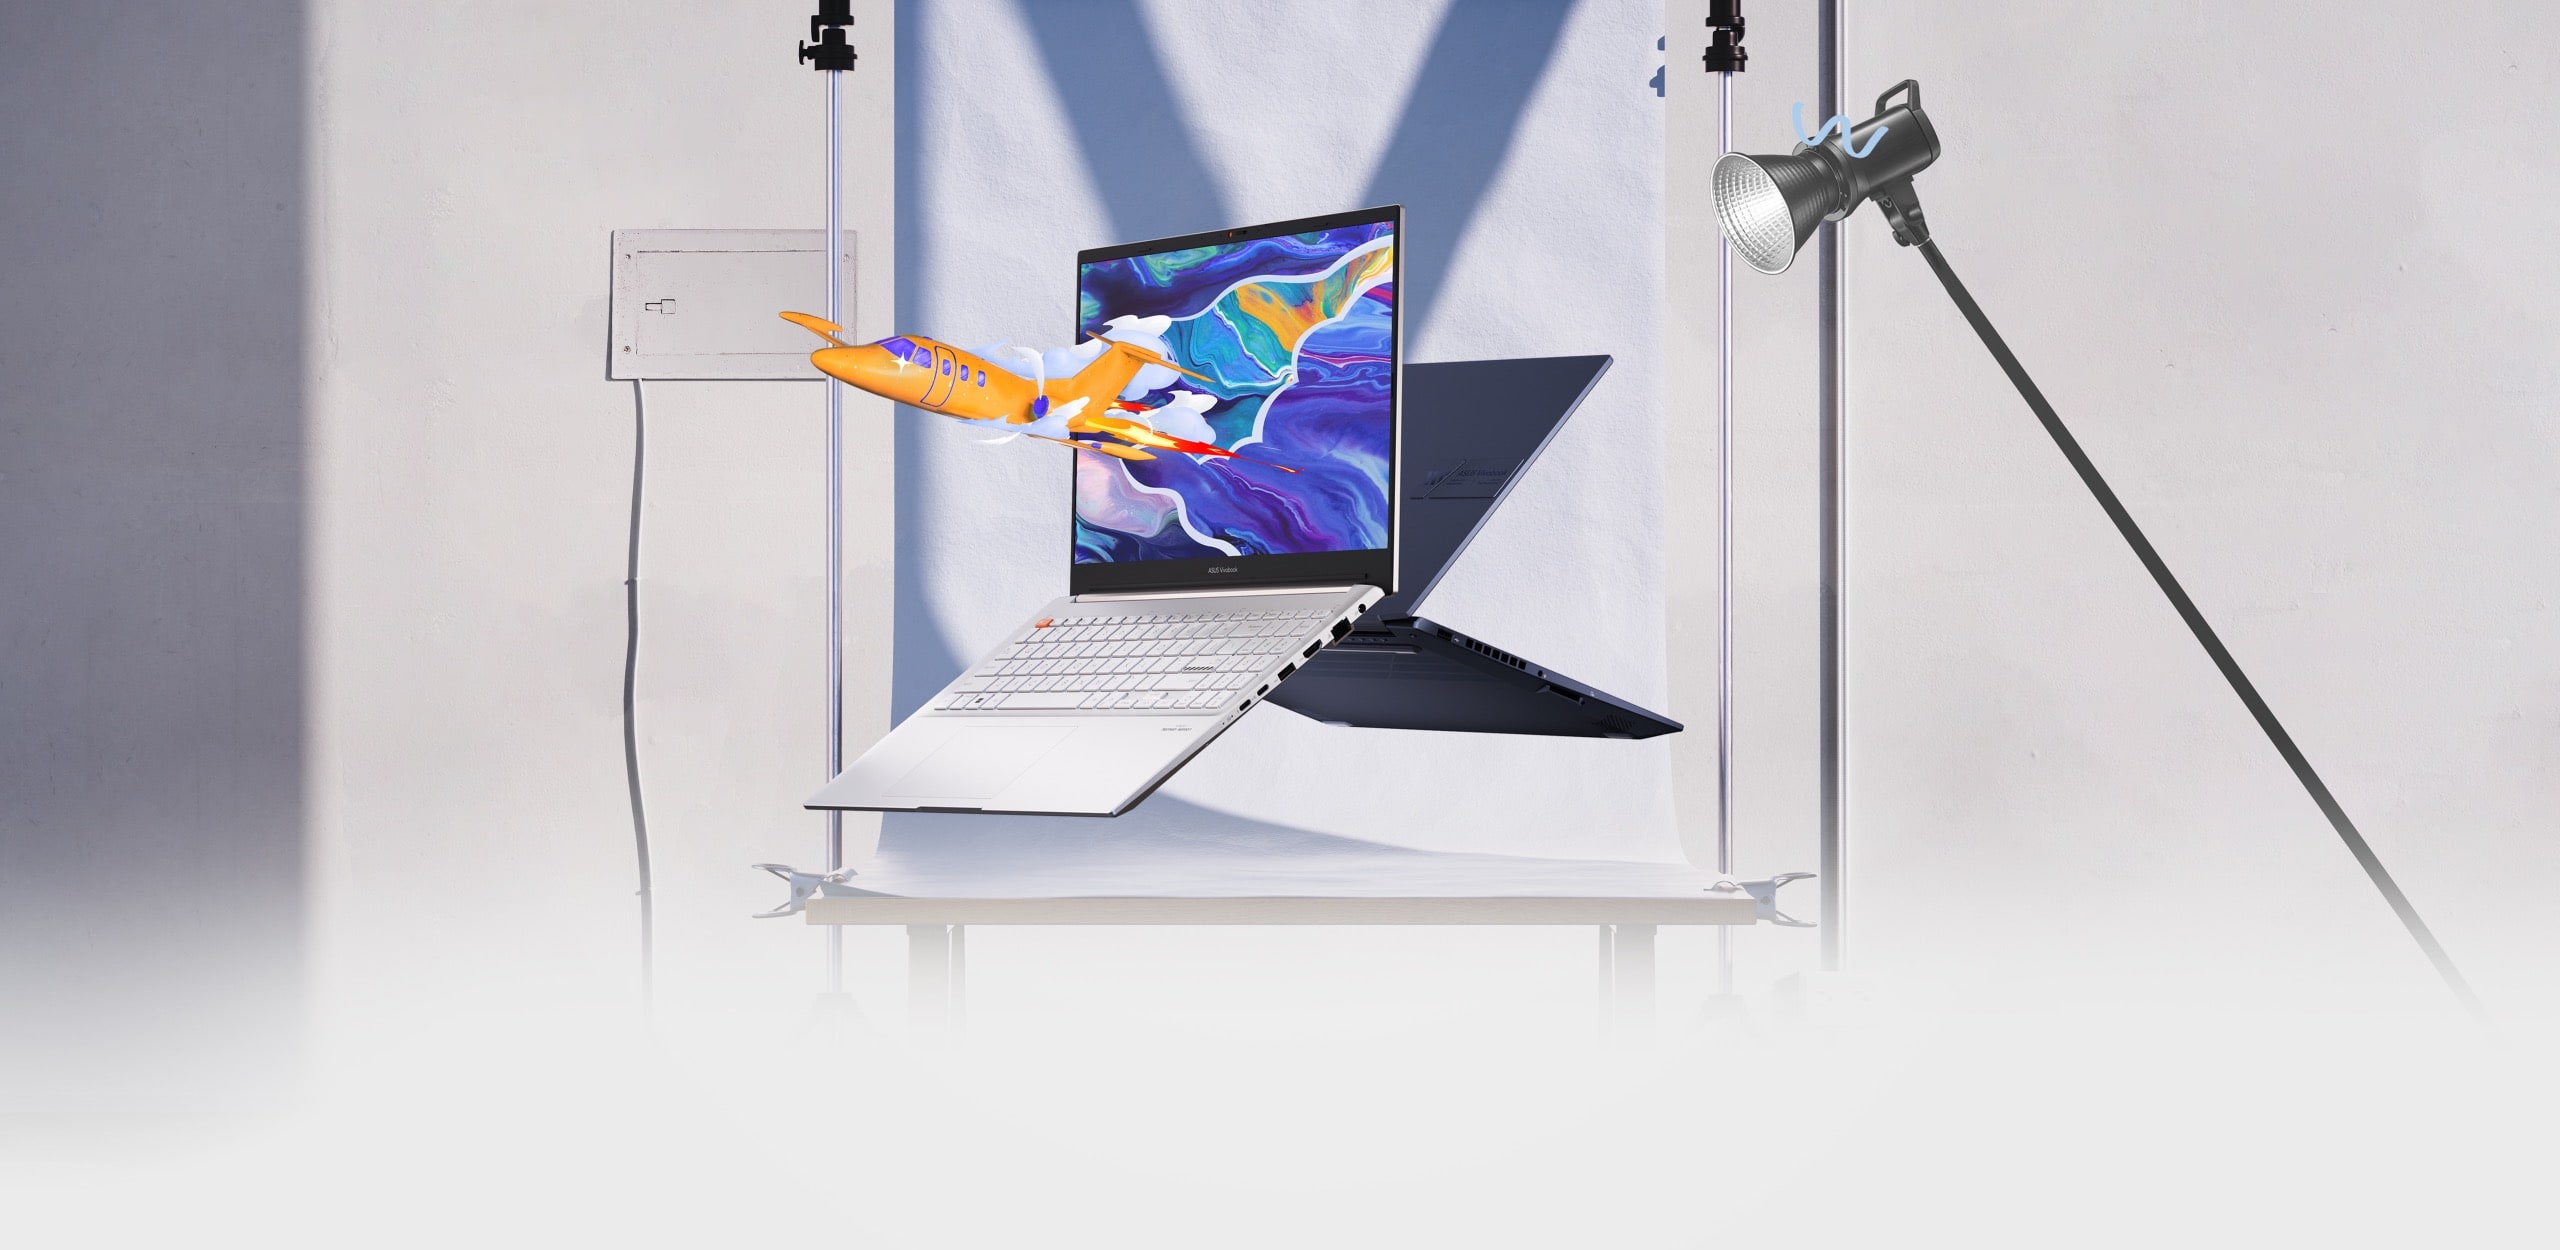 Two Vivobook Pro 15 OLED laptops in front and rear view, with one showing an airplane leaping out of a colorful graphic on the screen.